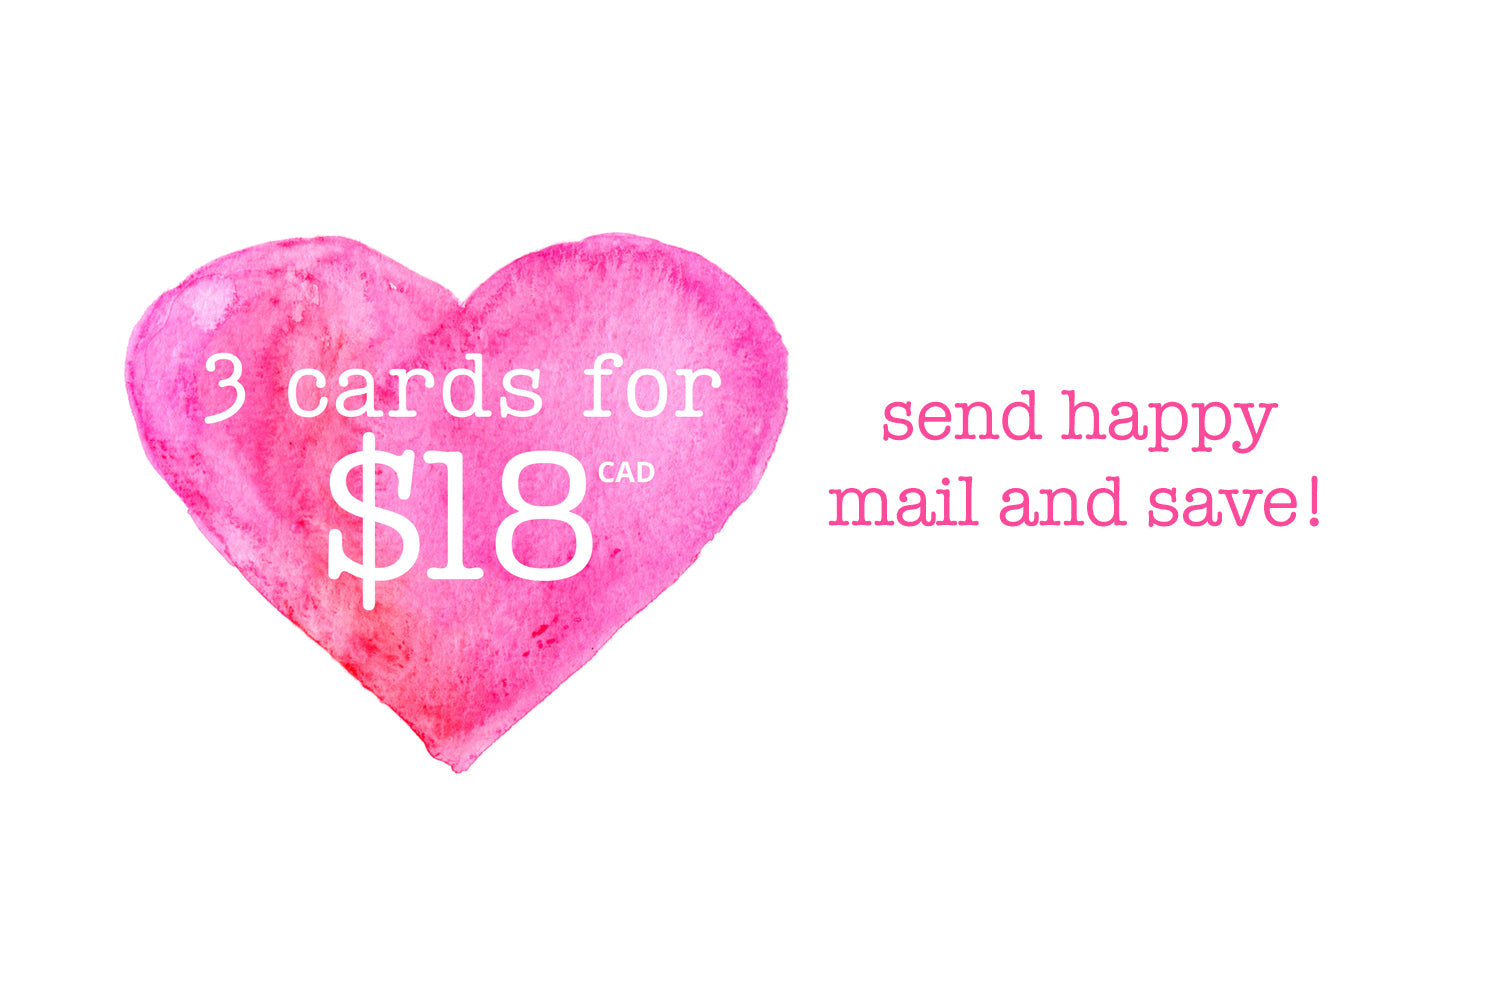 send happy mail and save: 3 cards for $18 CAD